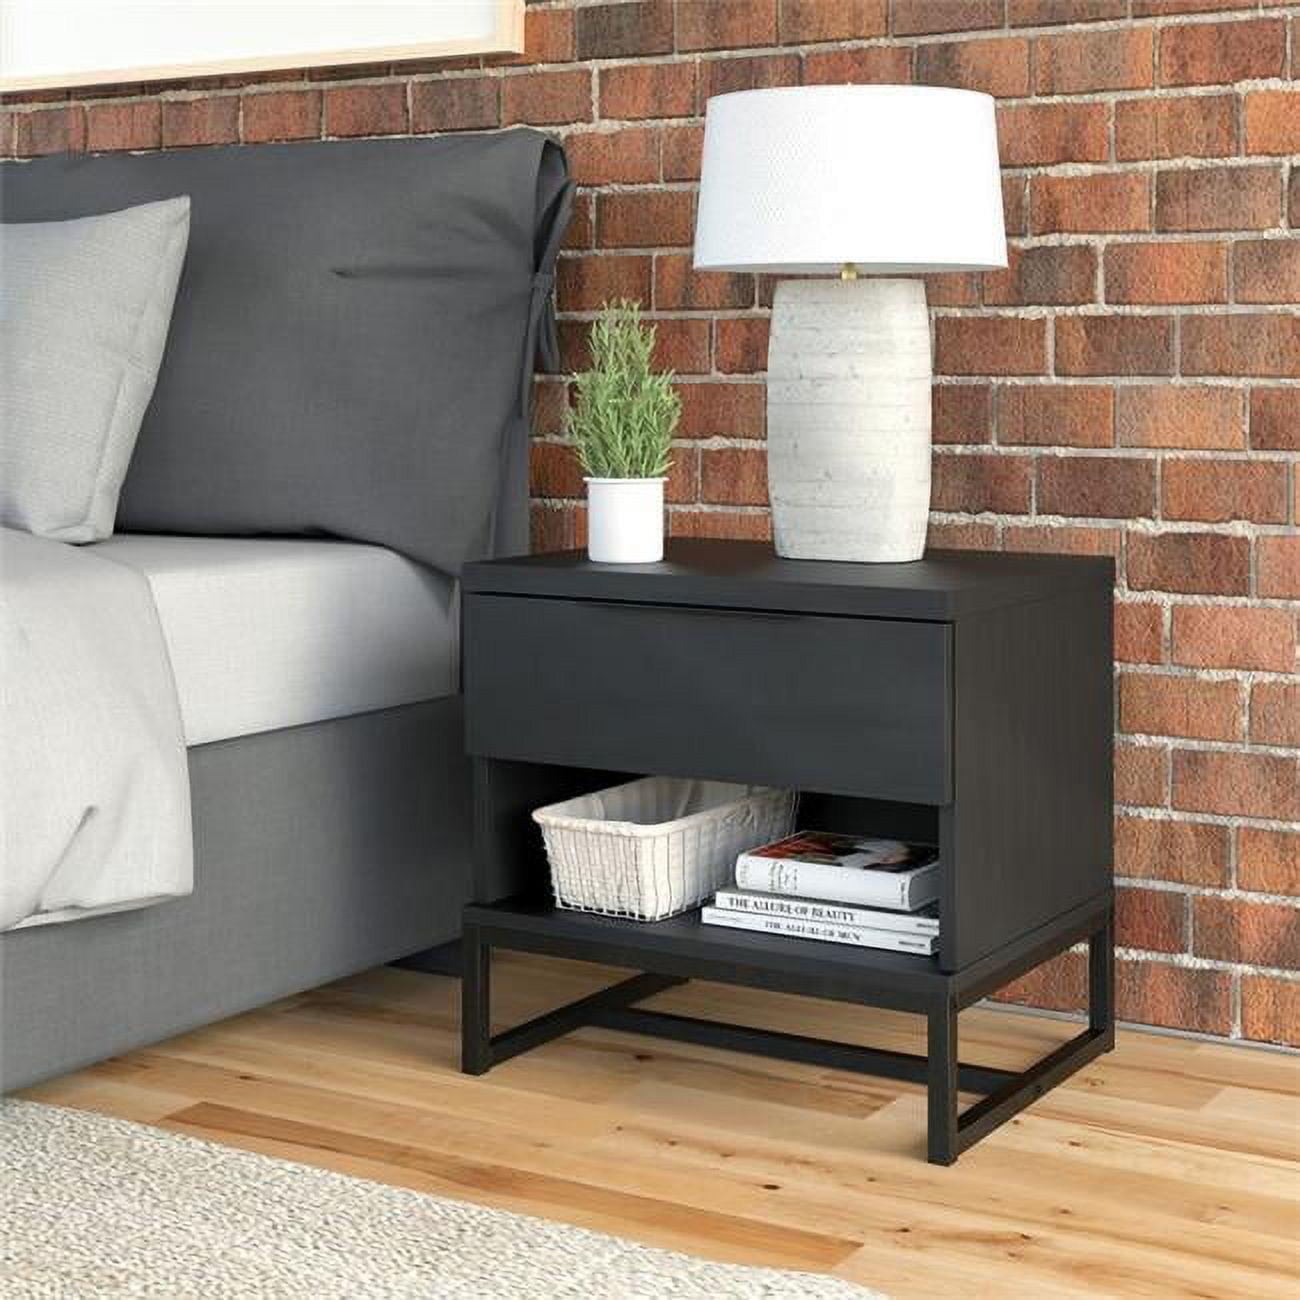 Catania Black MDF and Metal Low Profile Nightstand with 1 Drawer